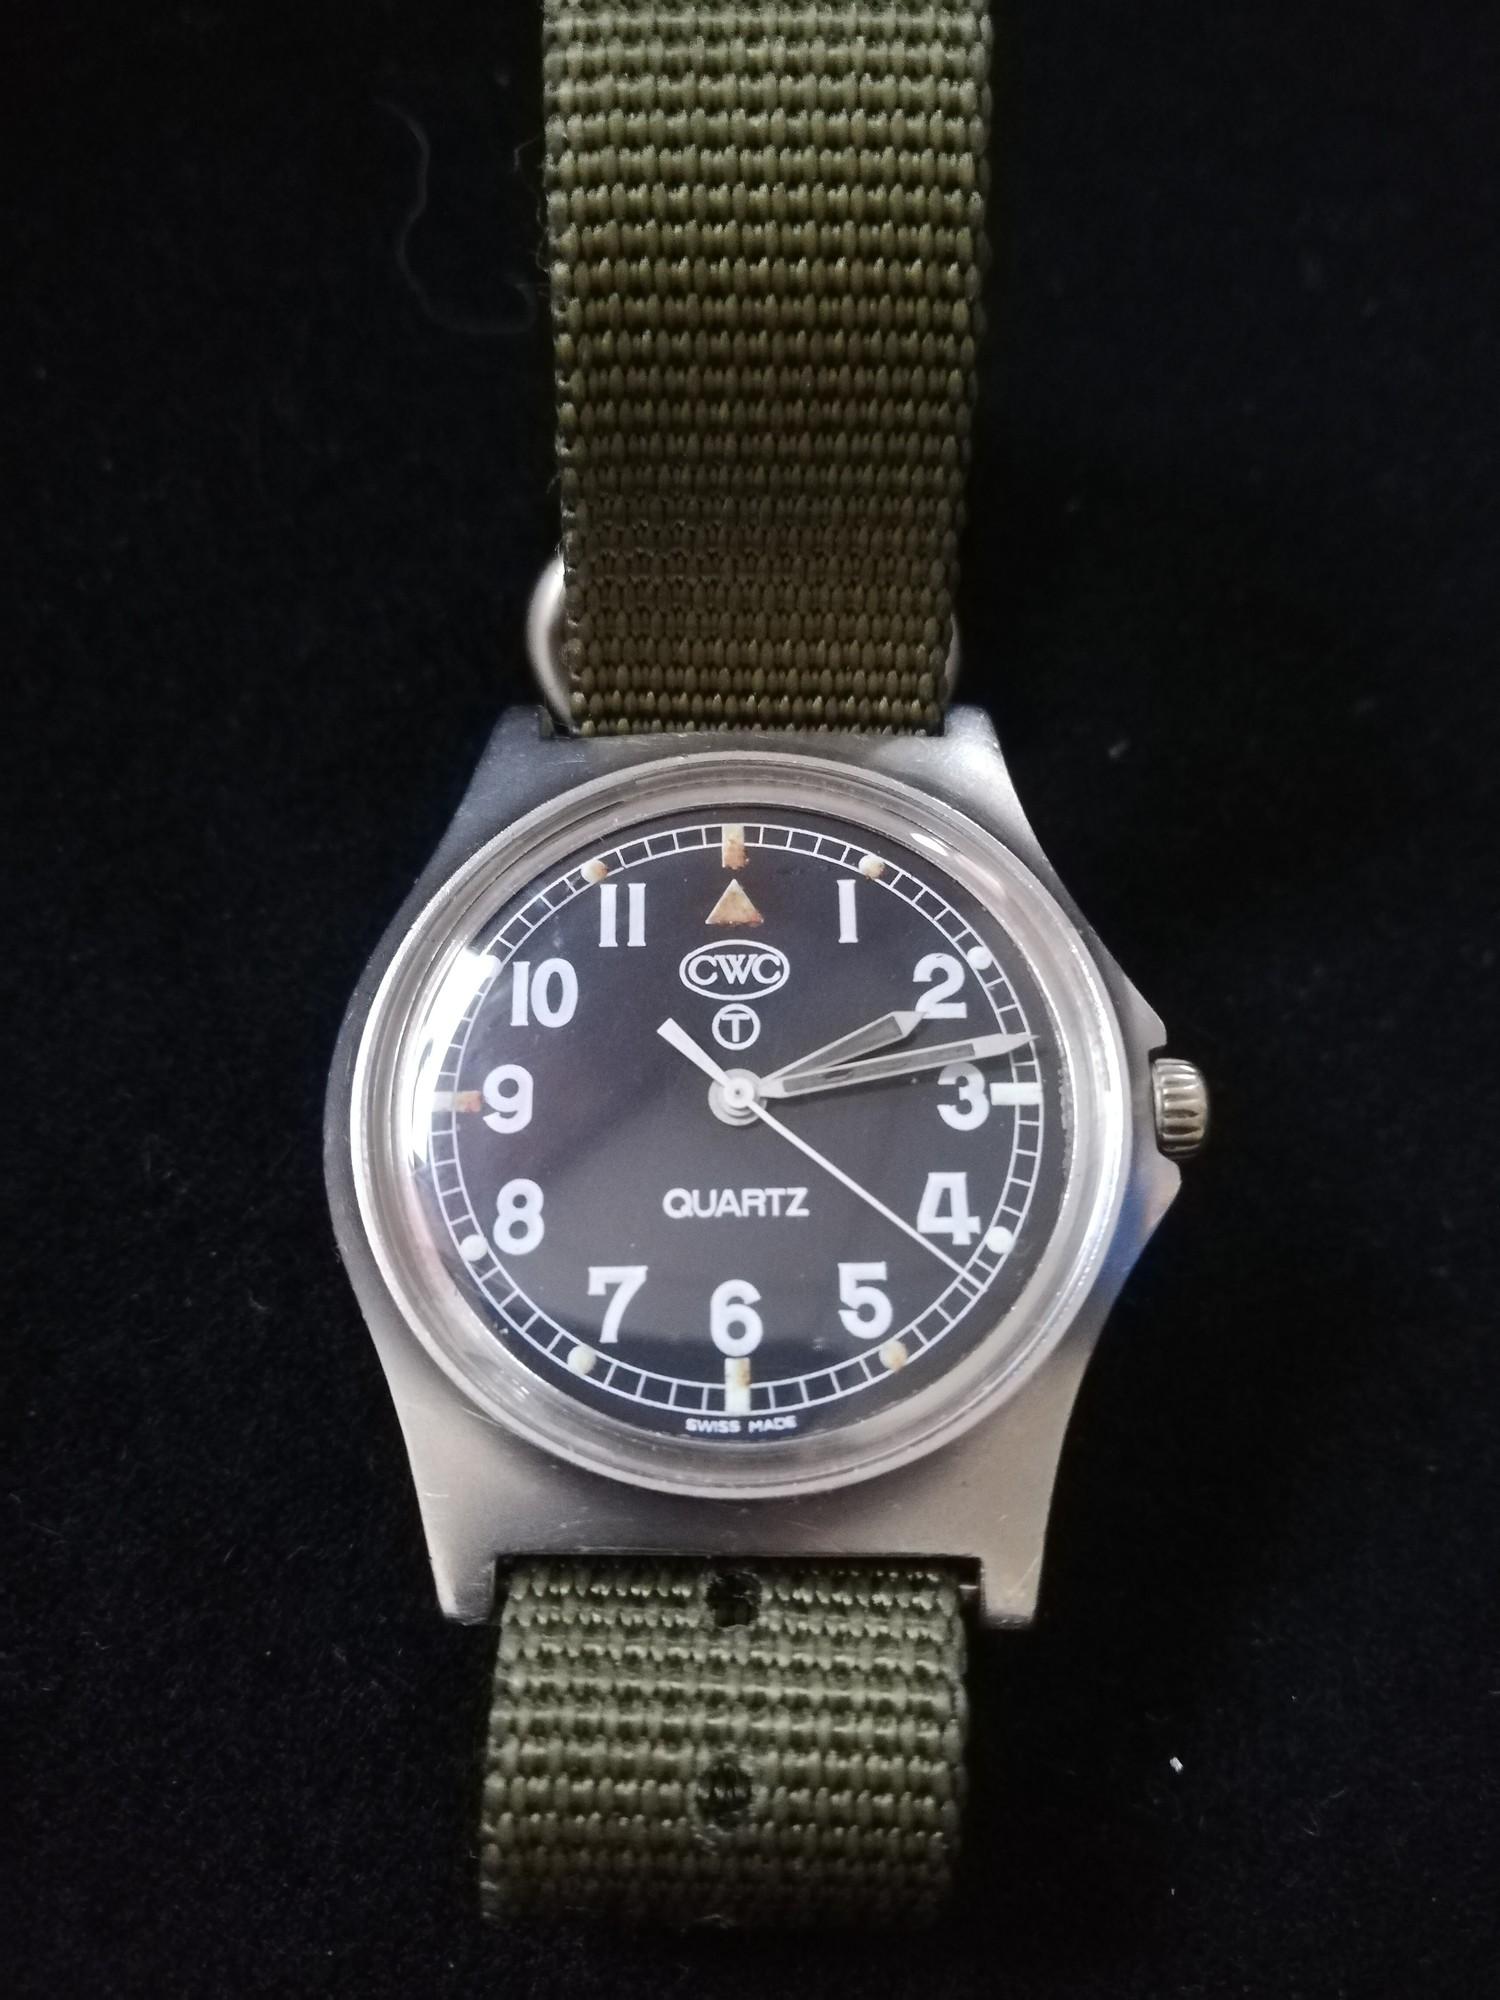 CWC (Cabot Watch Company) military quartz driven watch dated 99 to reverse